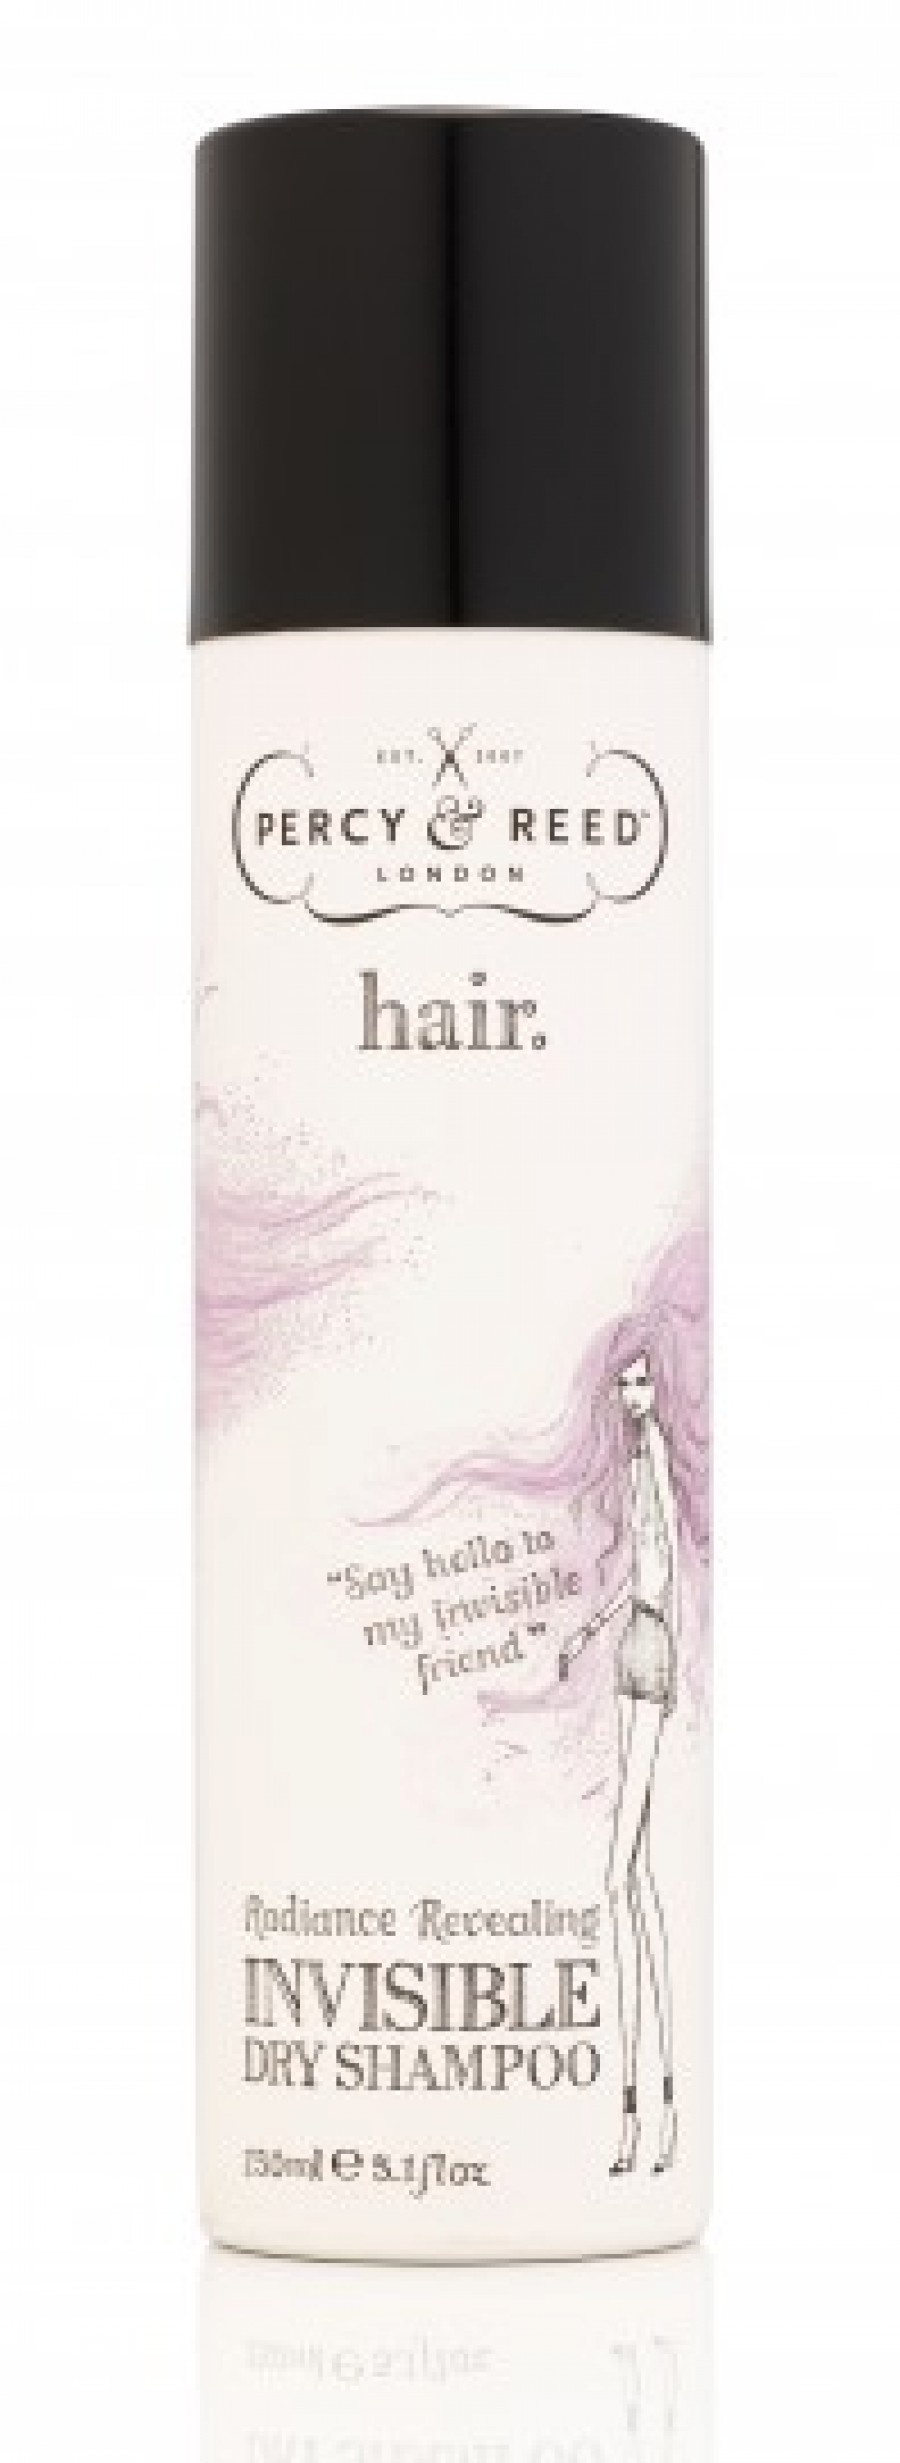 PERCY & REED Radiance Revealing Invisible Dry Shampoo